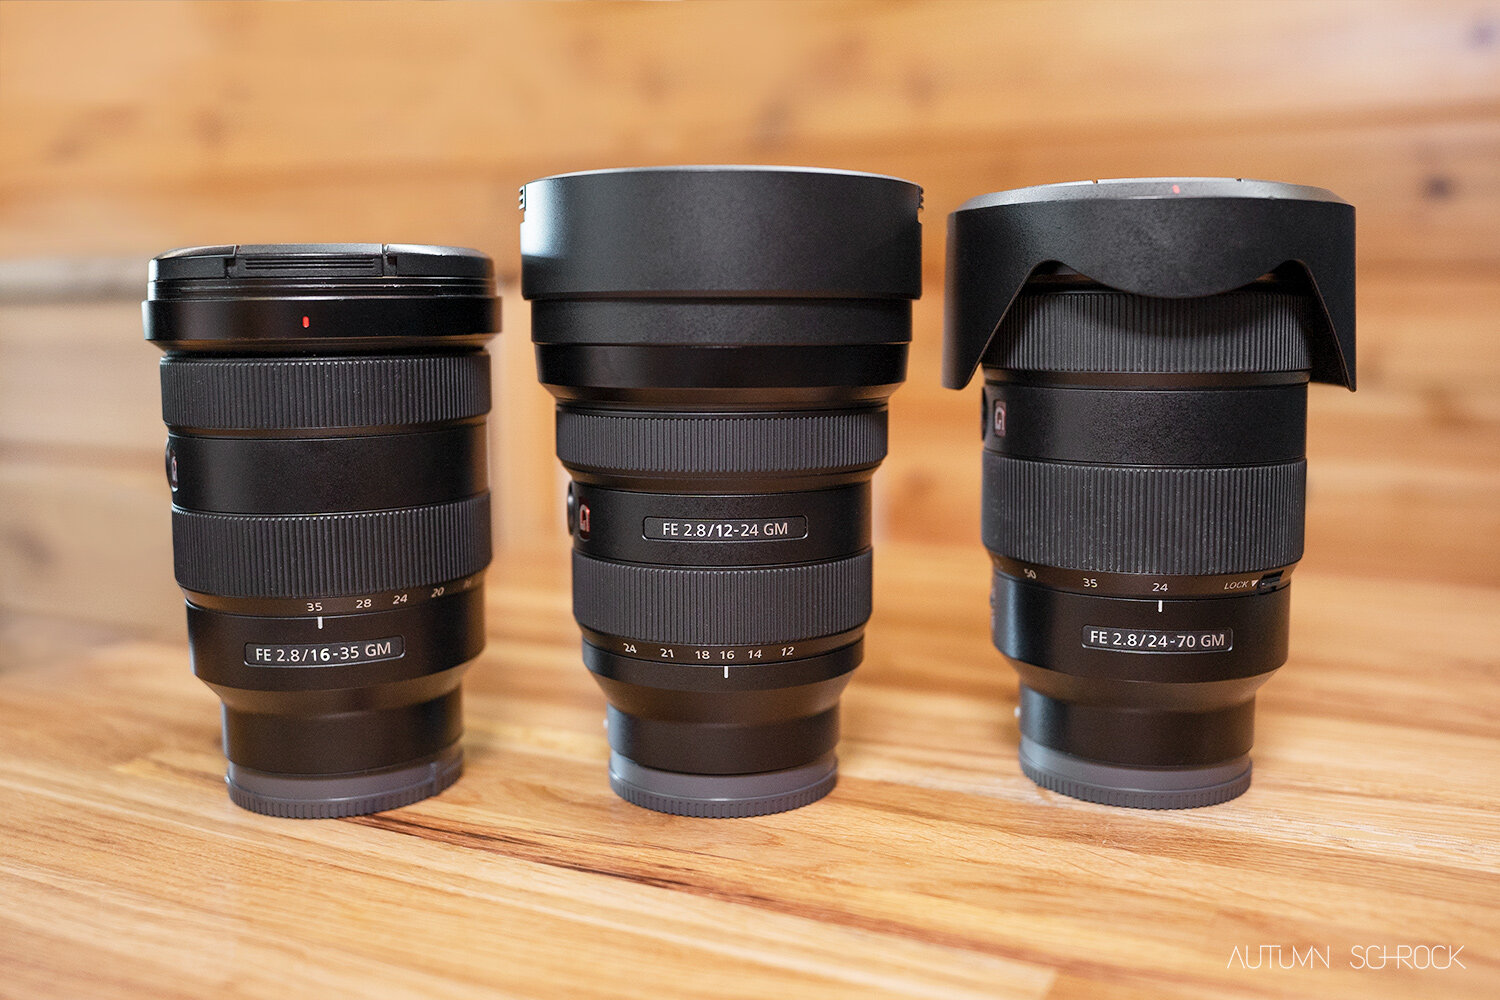 Sony FE 12-24mm f/2.8 G Master Lens Review — Autumn Schrock